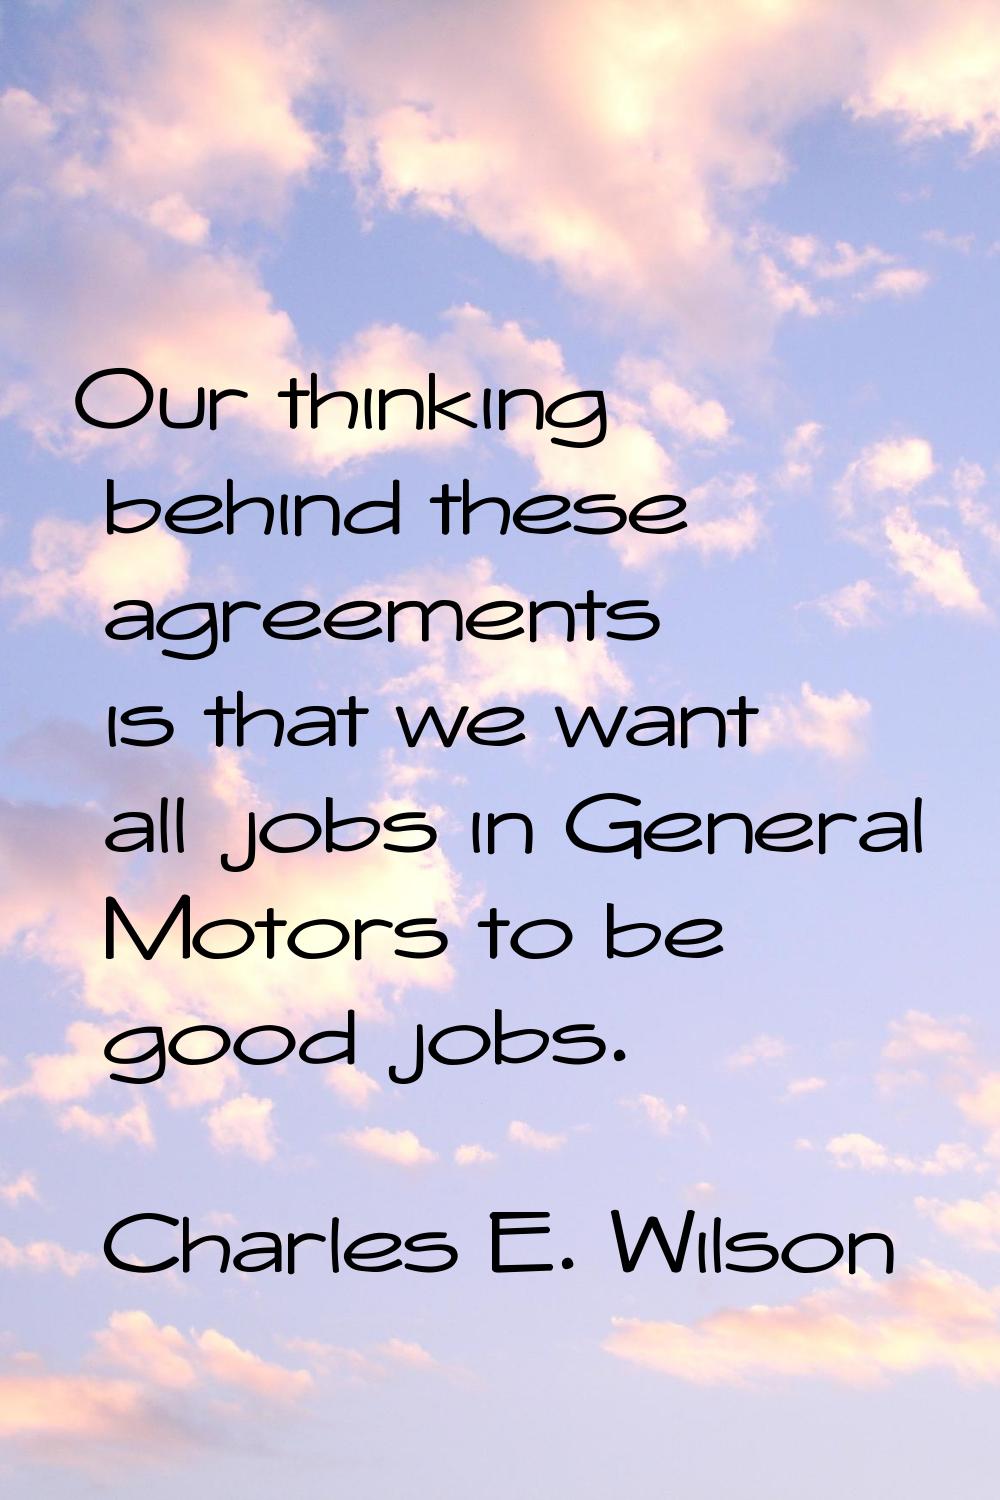 Our thinking behind these agreements is that we want all jobs in General Motors to be good jobs.